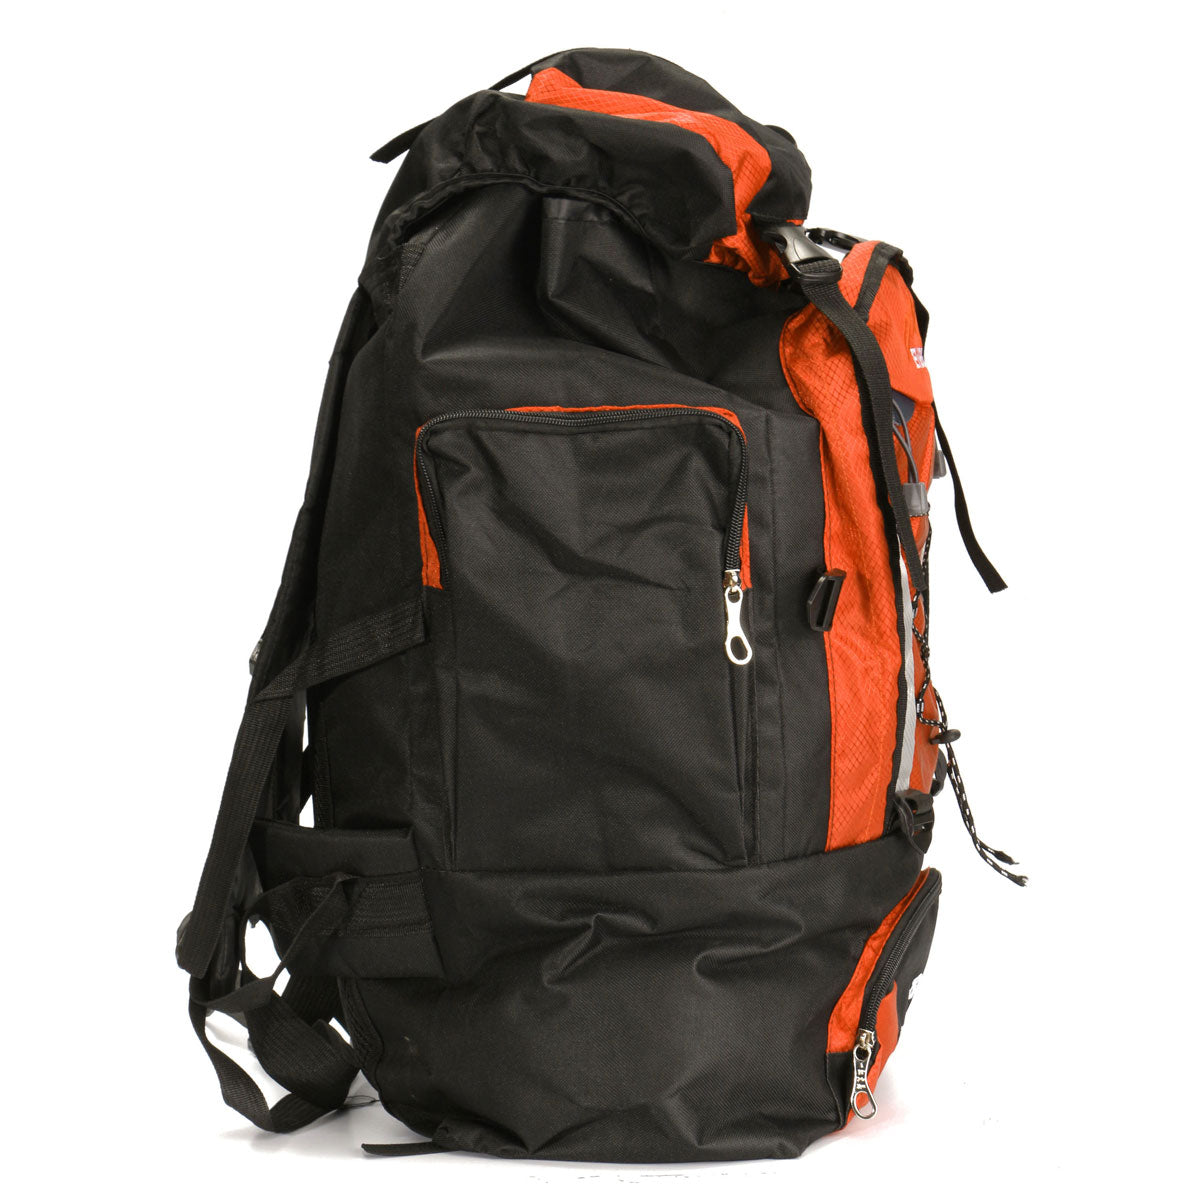 80L Polyester Waterproof Backpack for Camping Outdoors